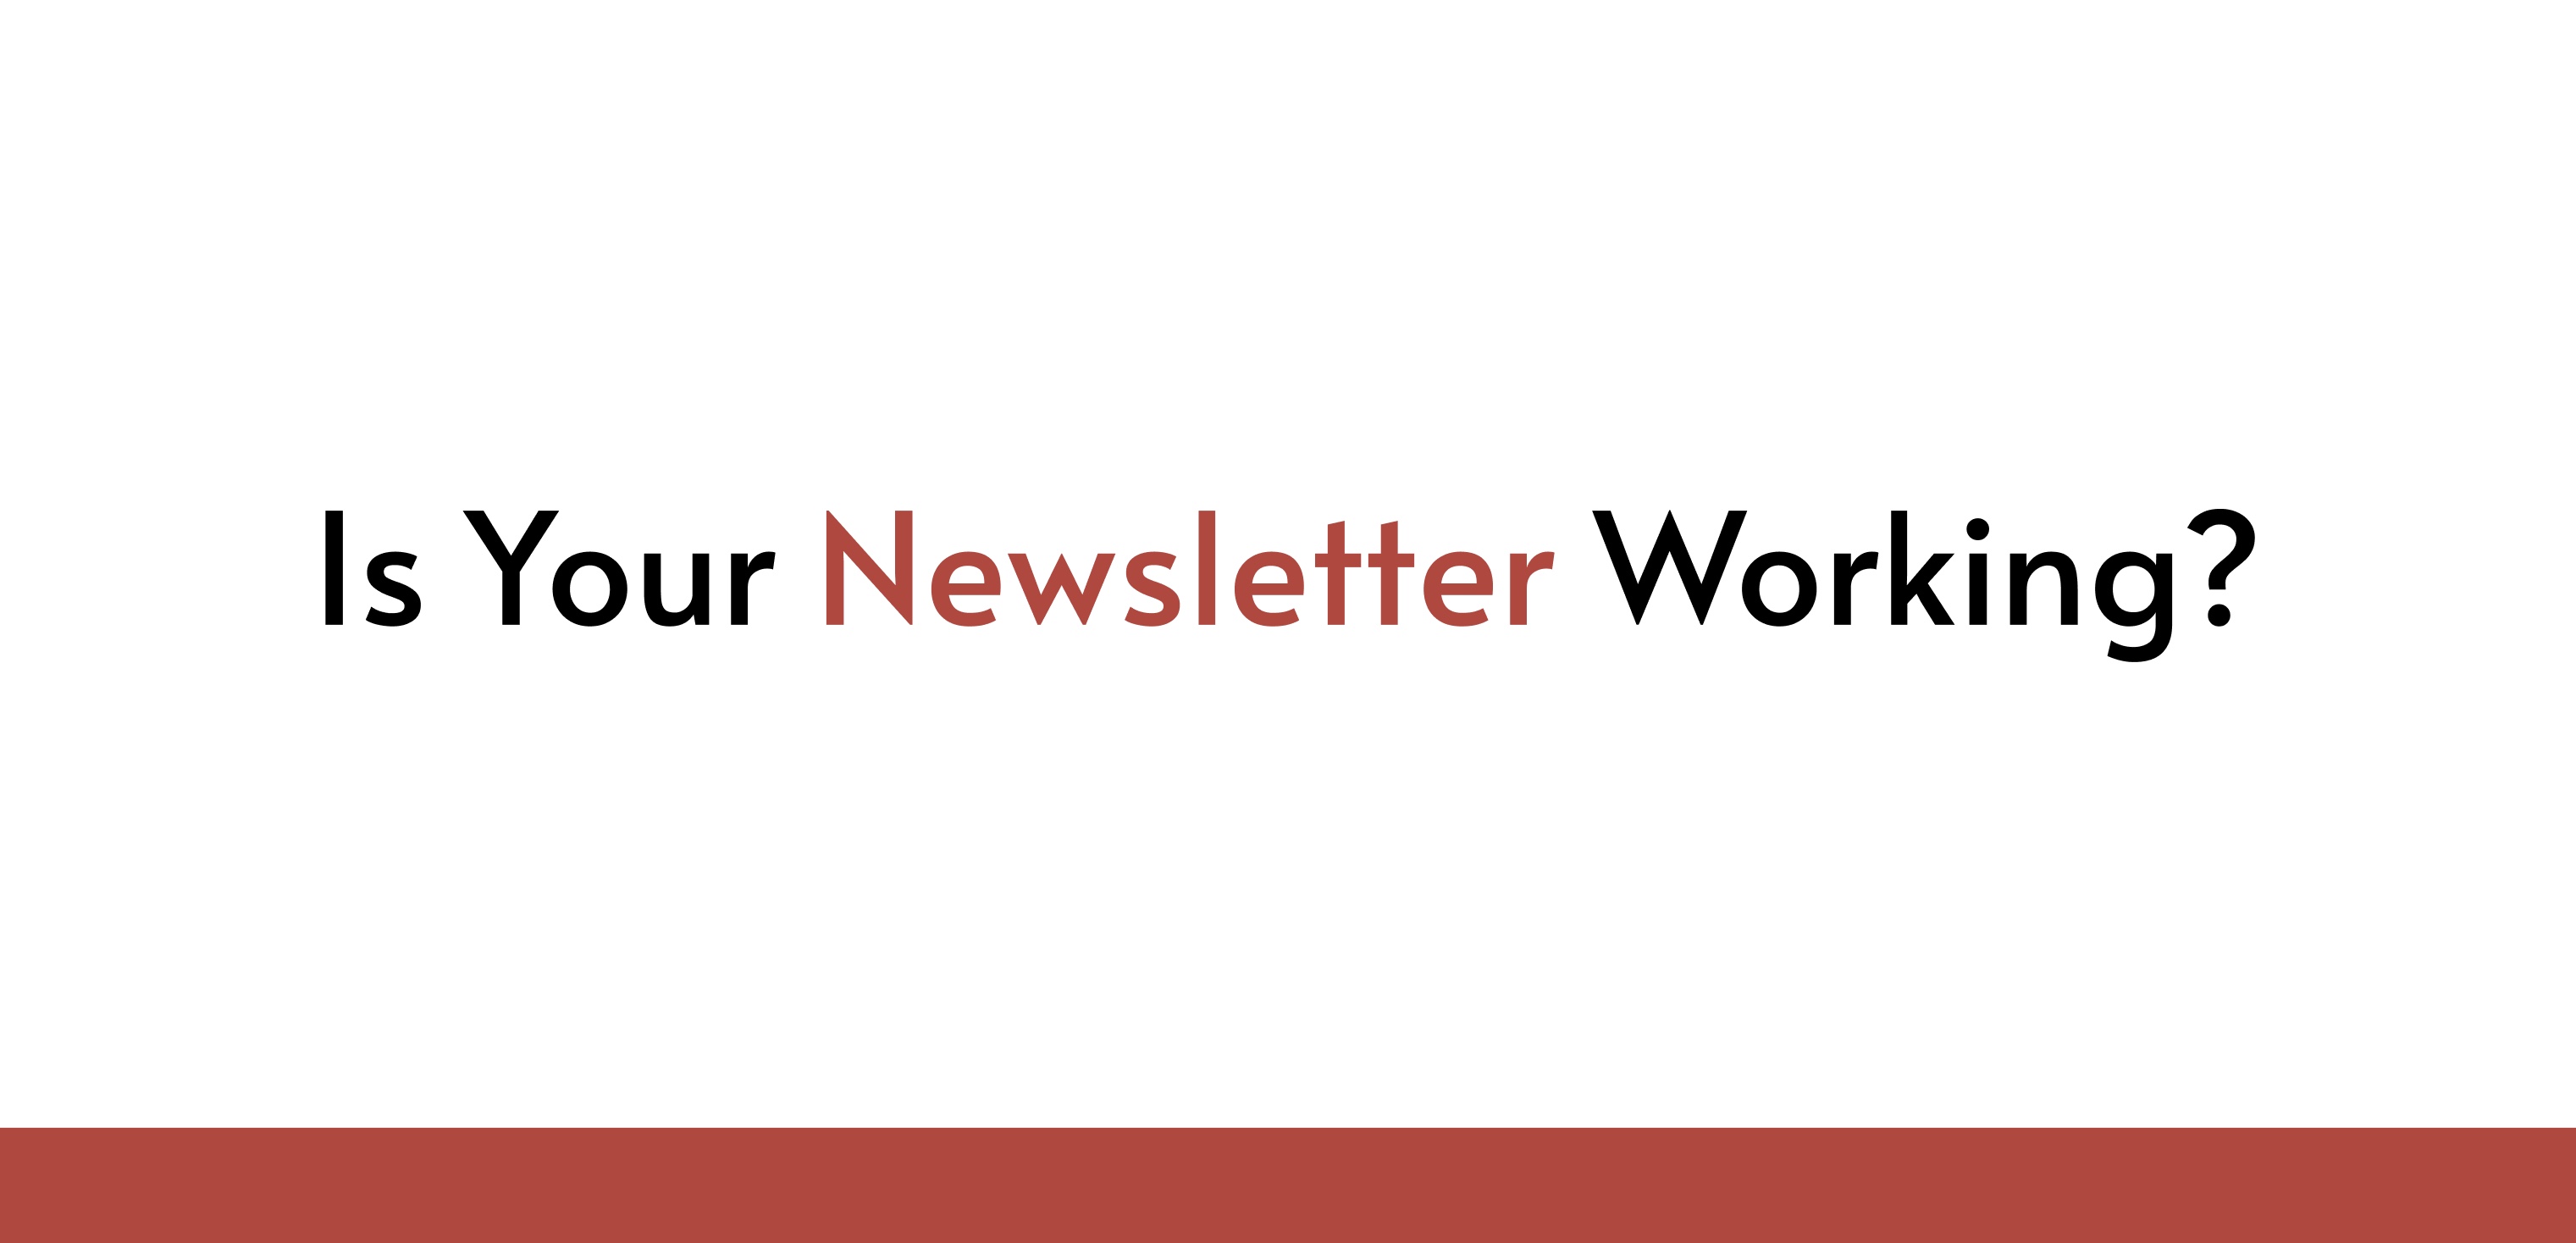 Is Your Newsletter Working?